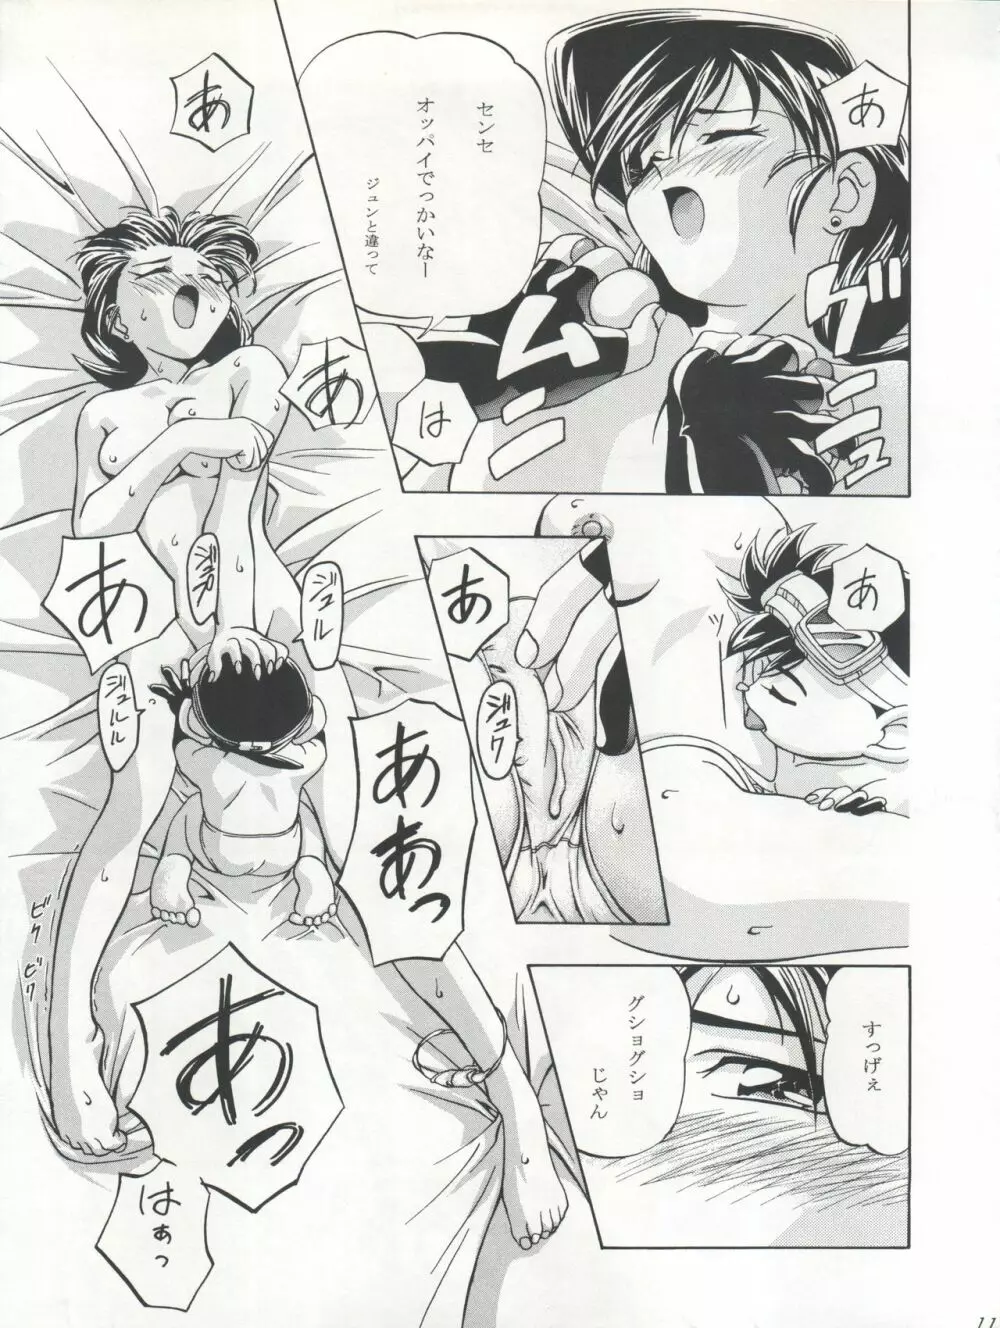 LET'S ら GO! 準備号 - page11